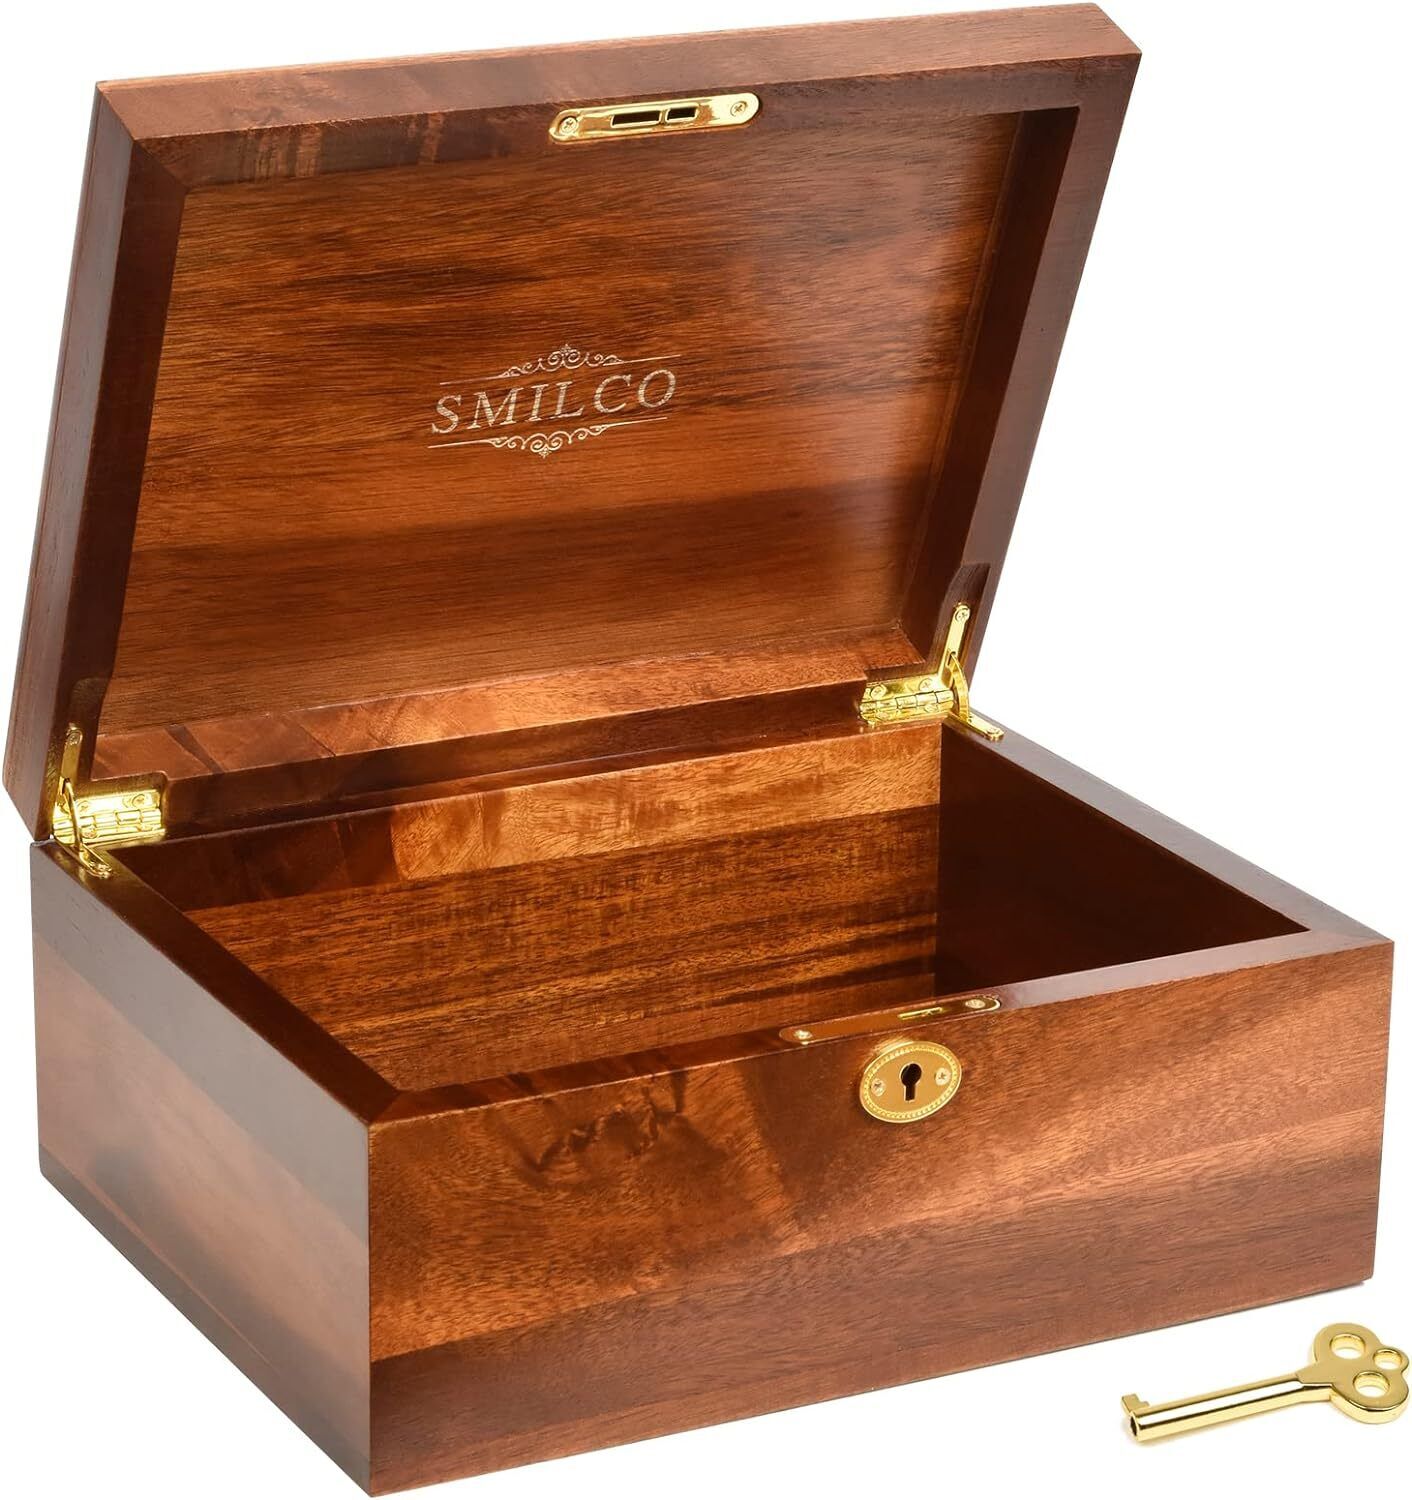 Wooden Storage Box with Hinged Lid Acacia Wood Hand-Crafted Wooden Box